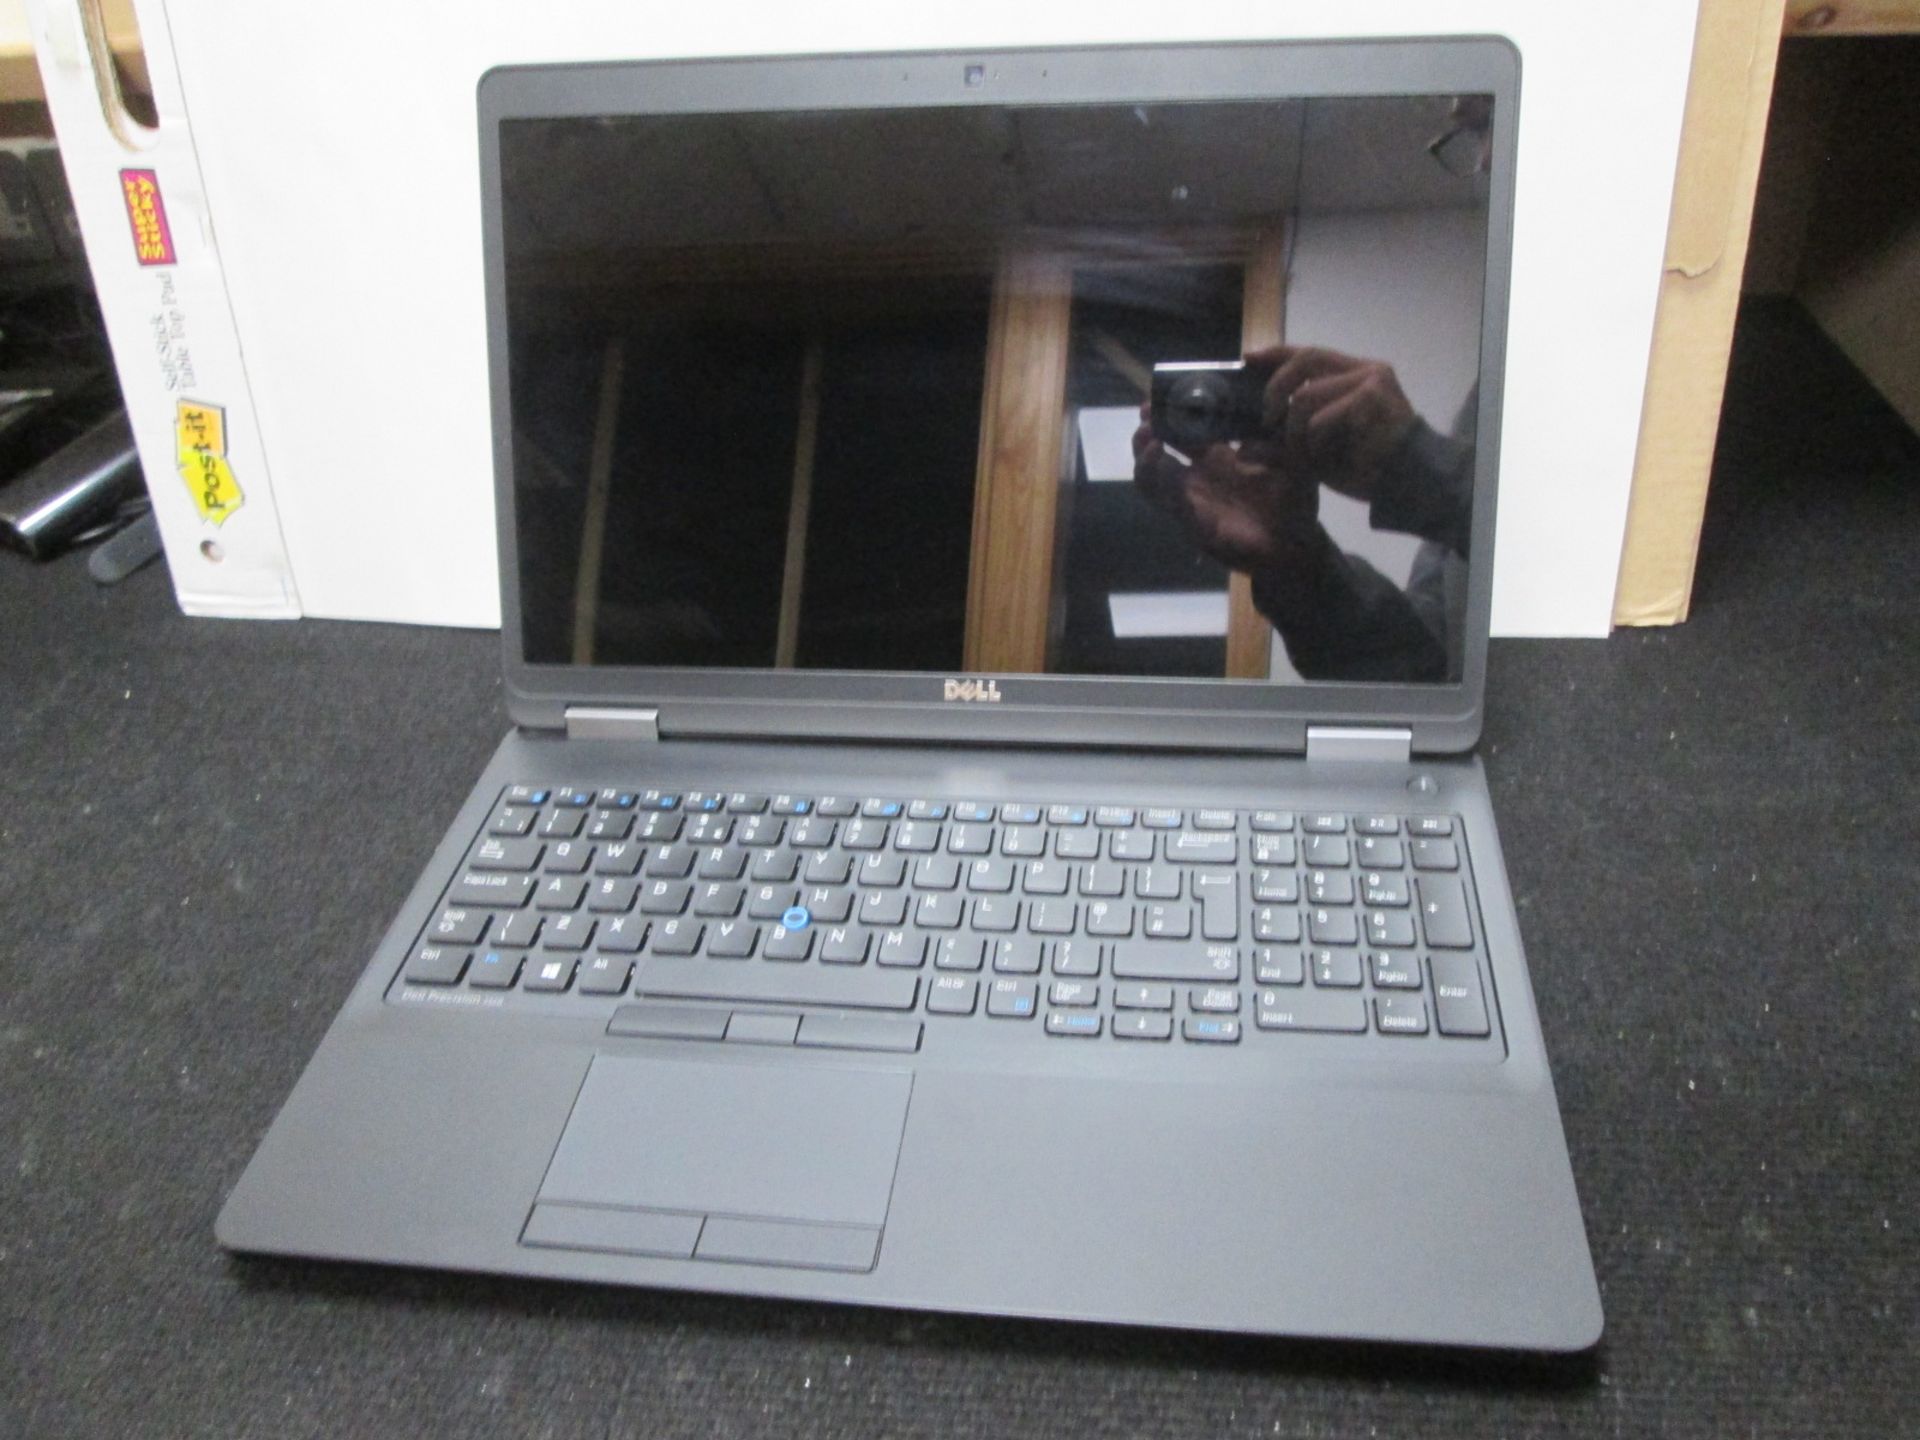 Dell Precision 3510 I7 Touchscreen Latop. In flight case. No operating software installed - Image 2 of 5